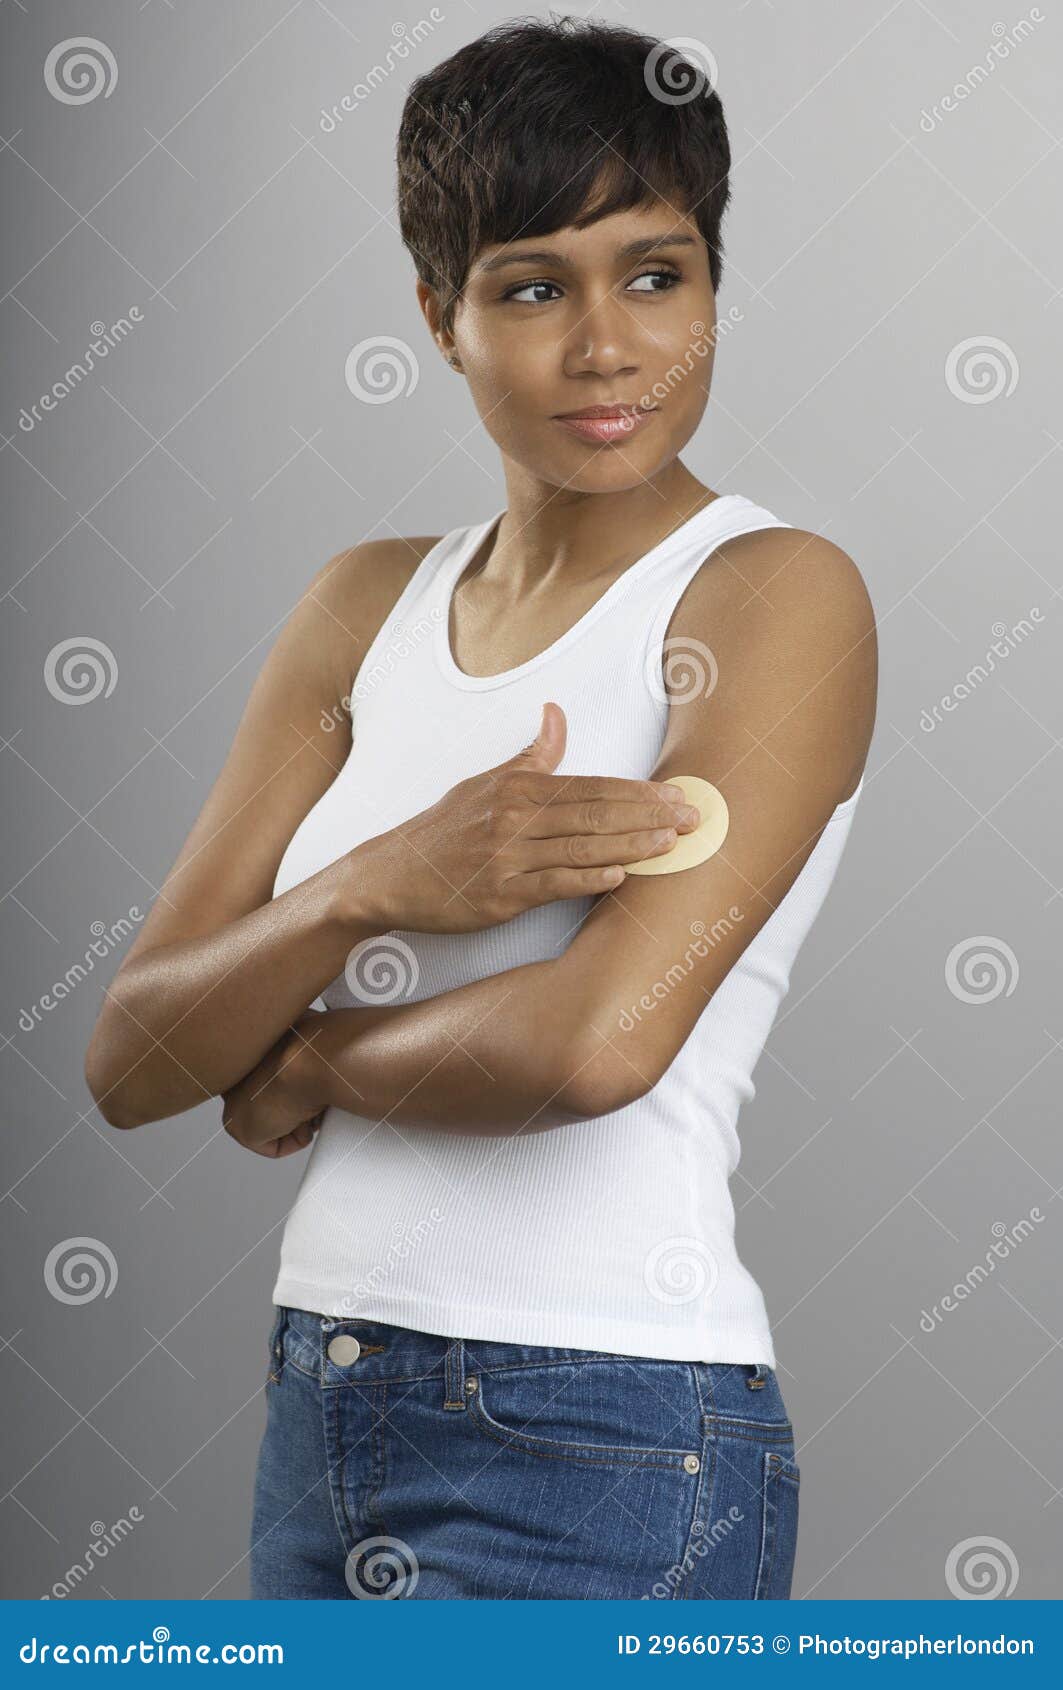 young woman with nicotine patch on arm